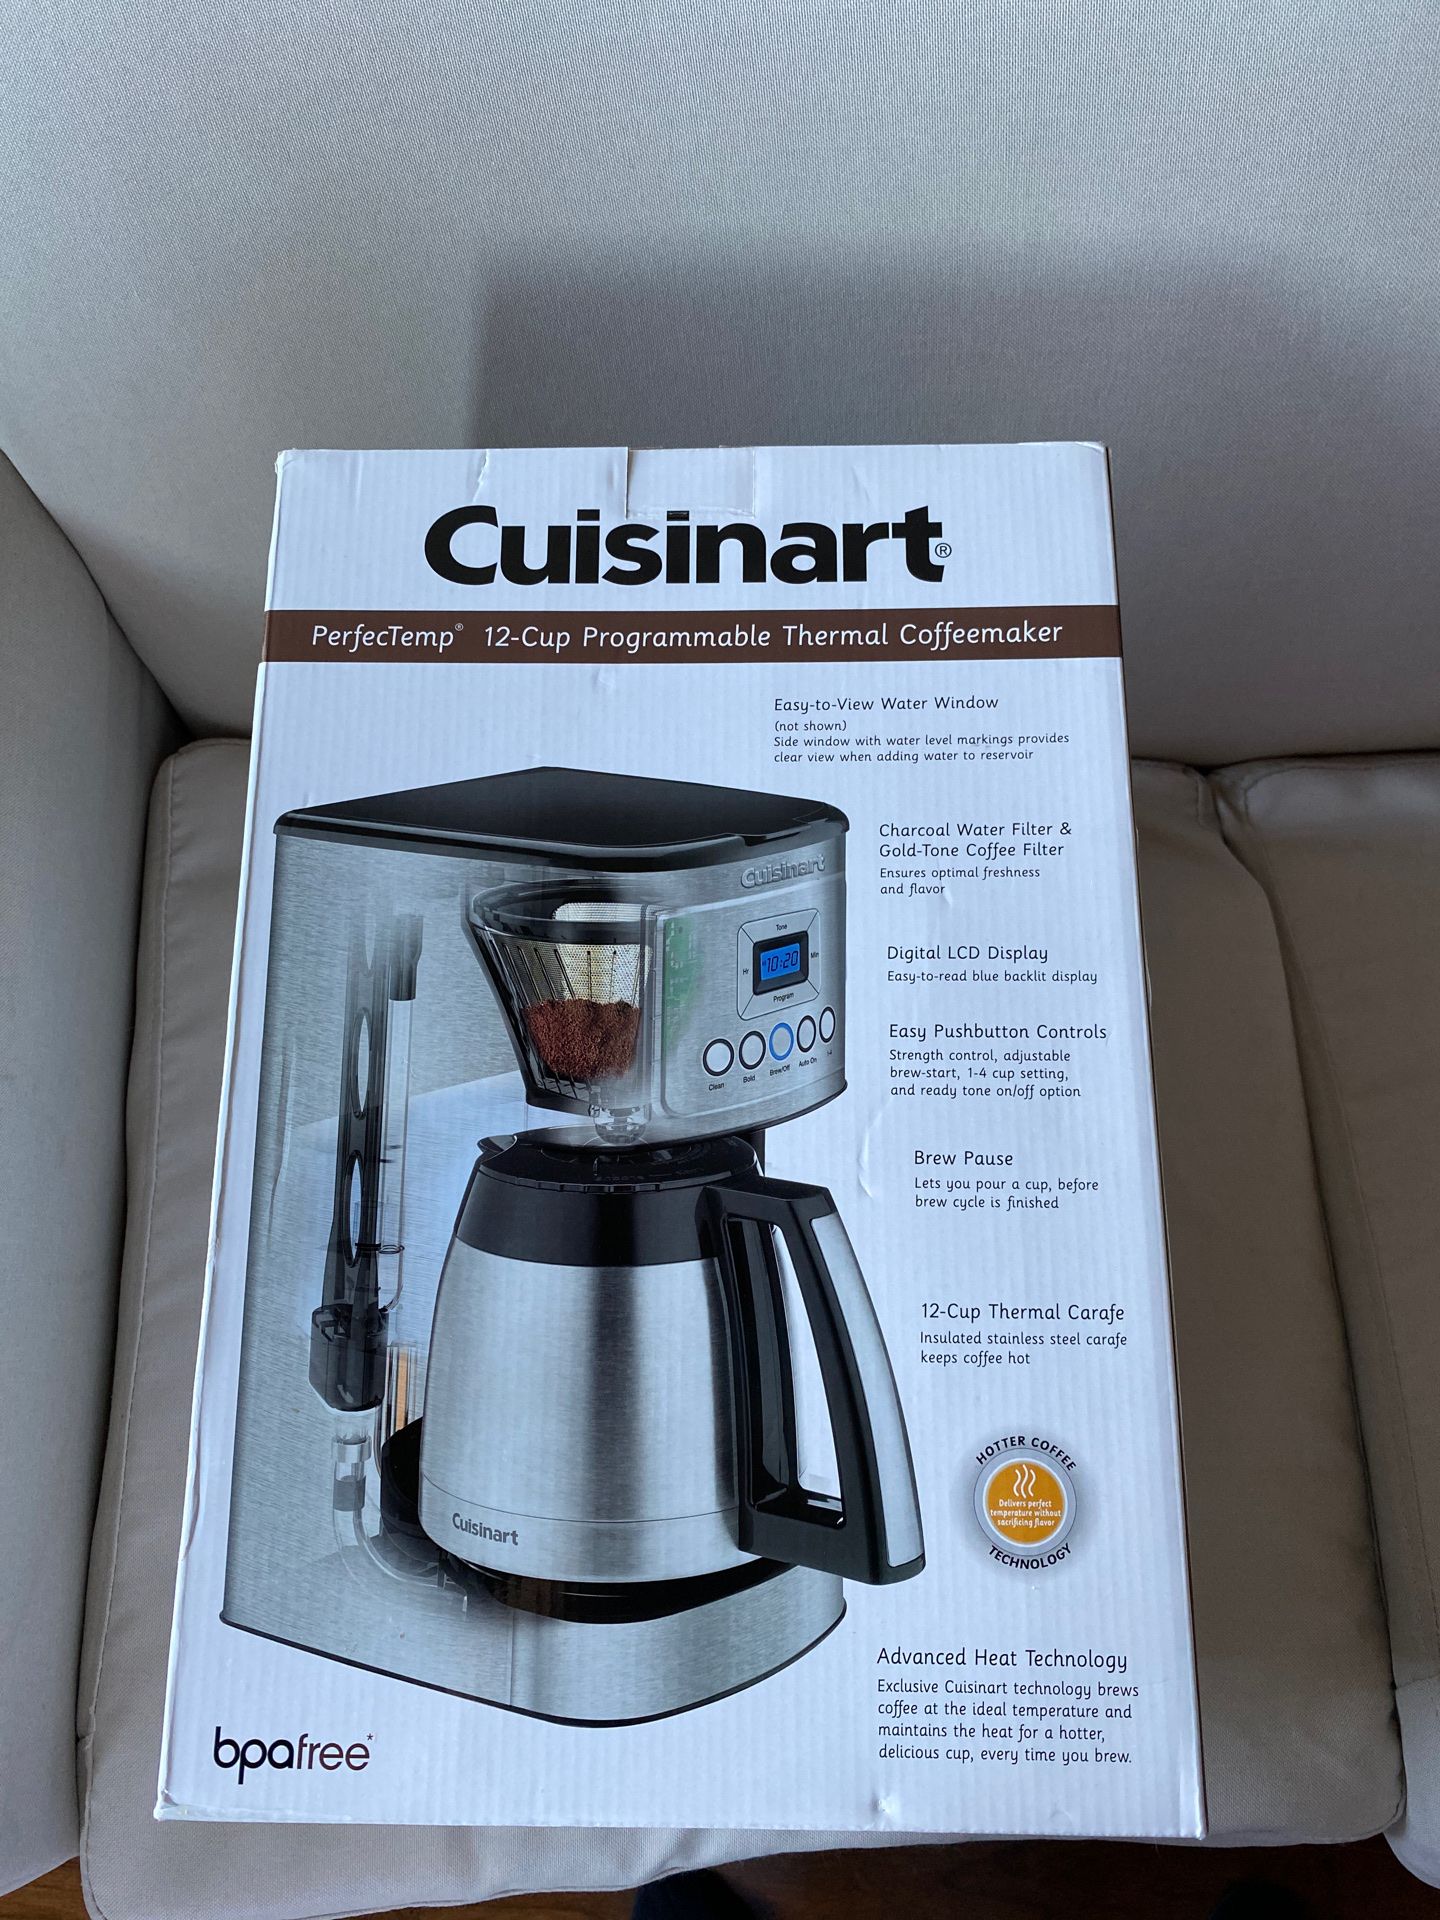 Cuisinart perfectemp 12-cup programmable thermal coffee maker (stainless steel)